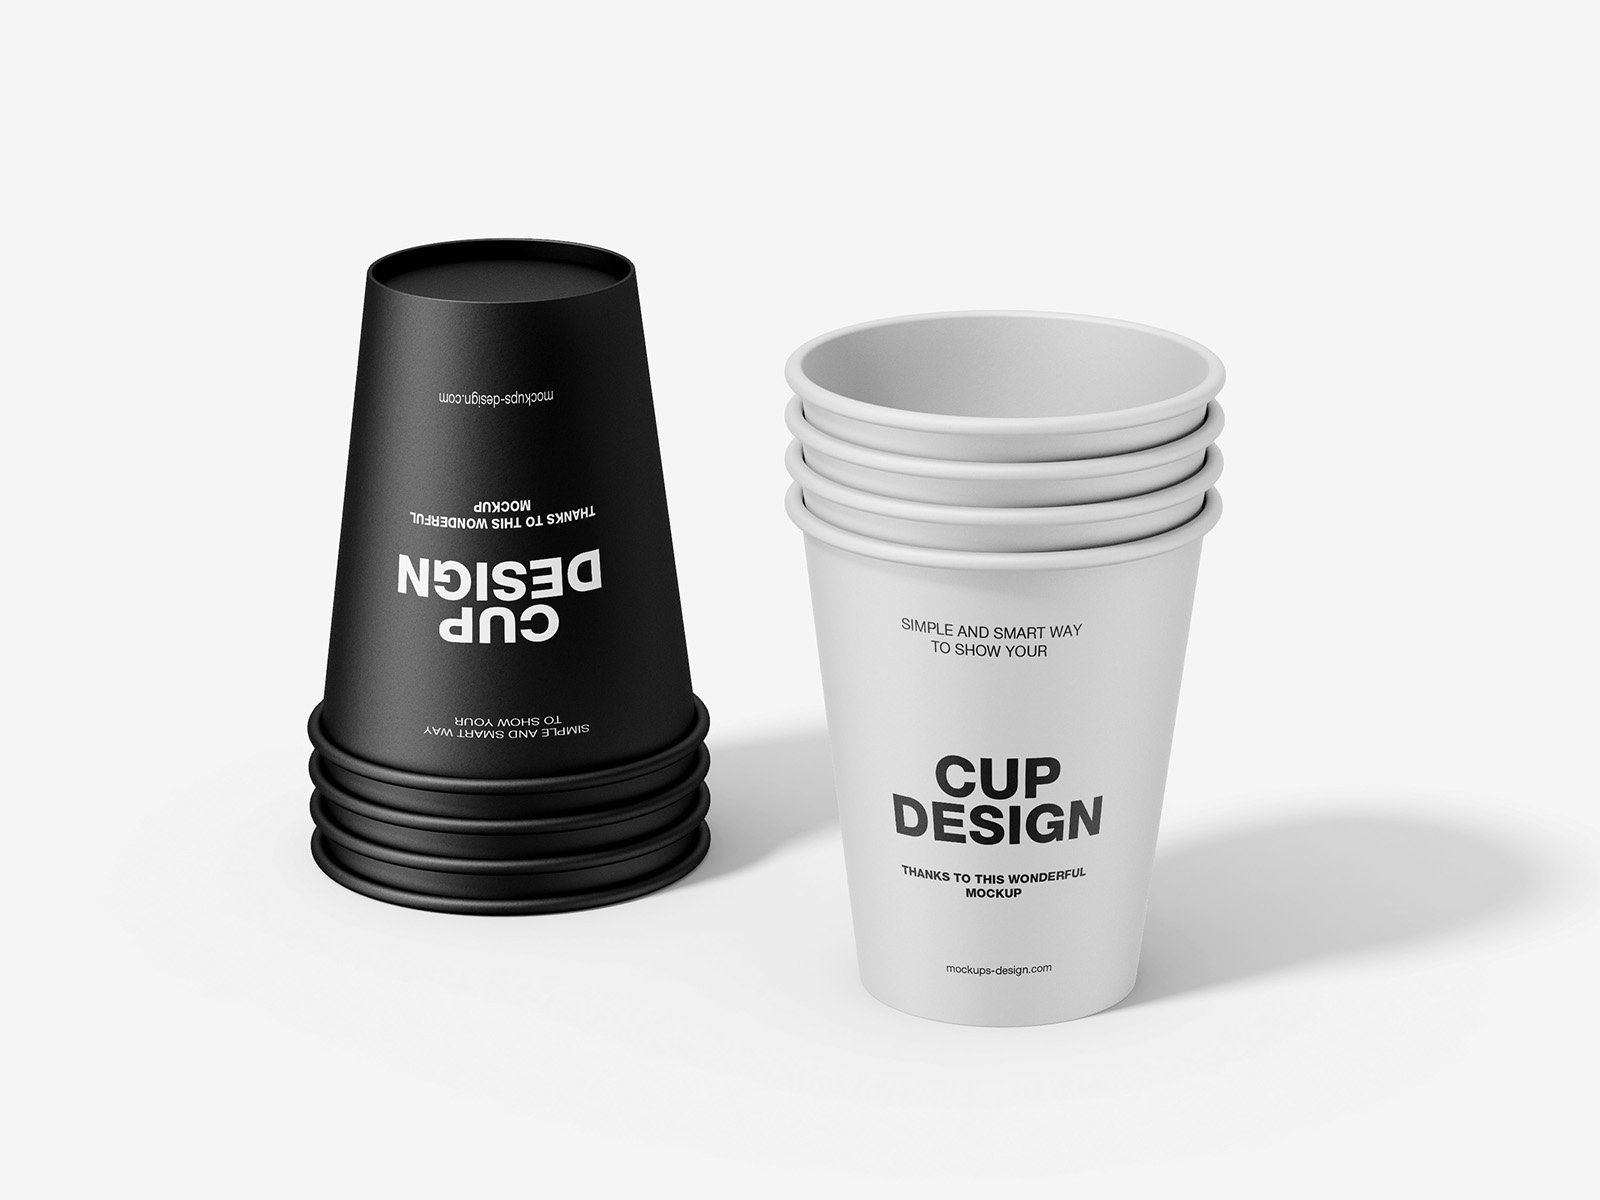 Two Floating Disposable Coffee Cups Mockup (FREE) - Resource Boy